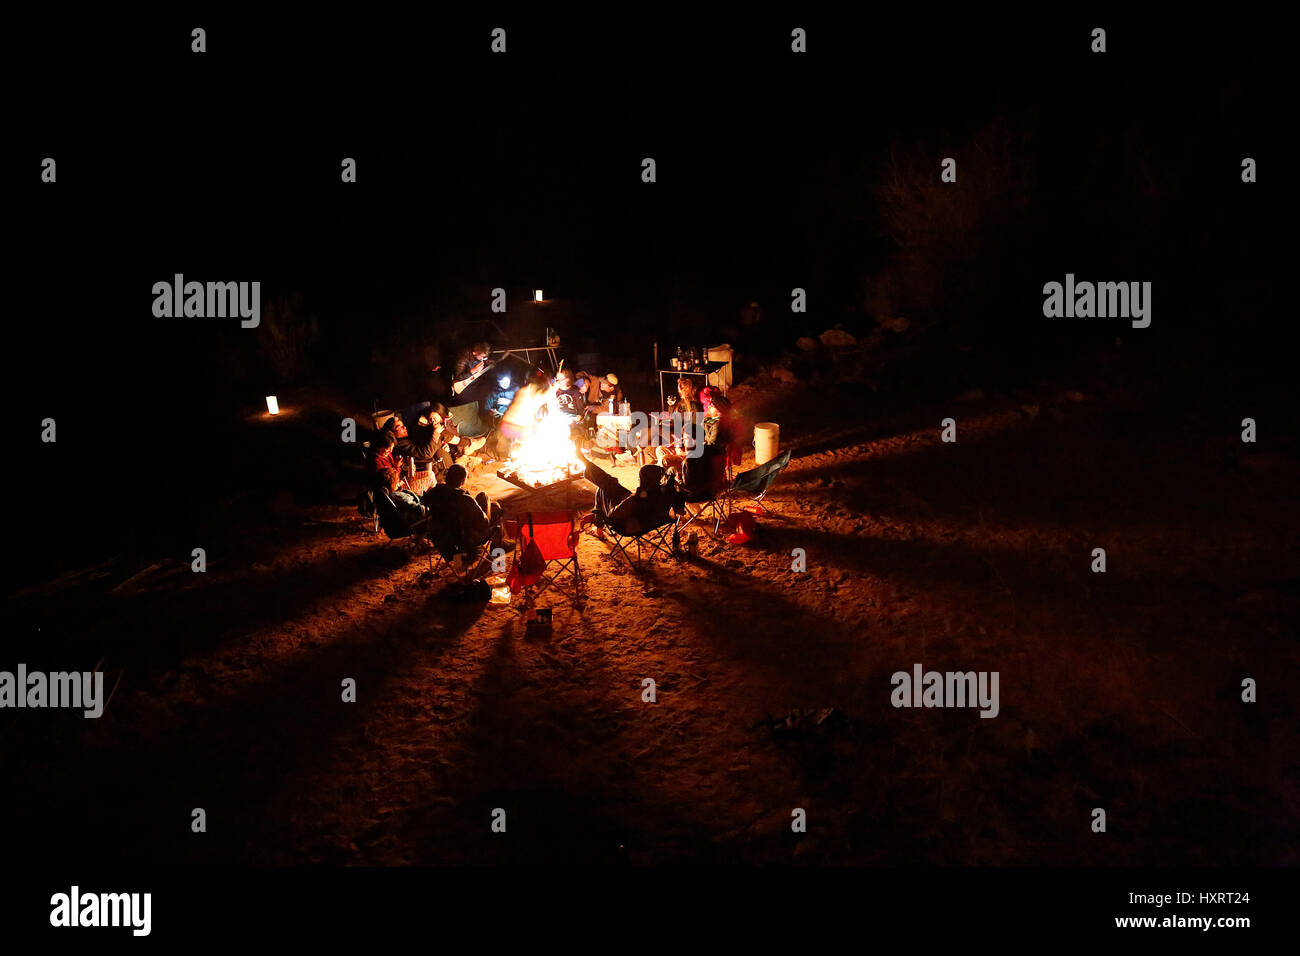 People around a campfire in Grand Canyon National Park, Arizona, United States. Stock Photo